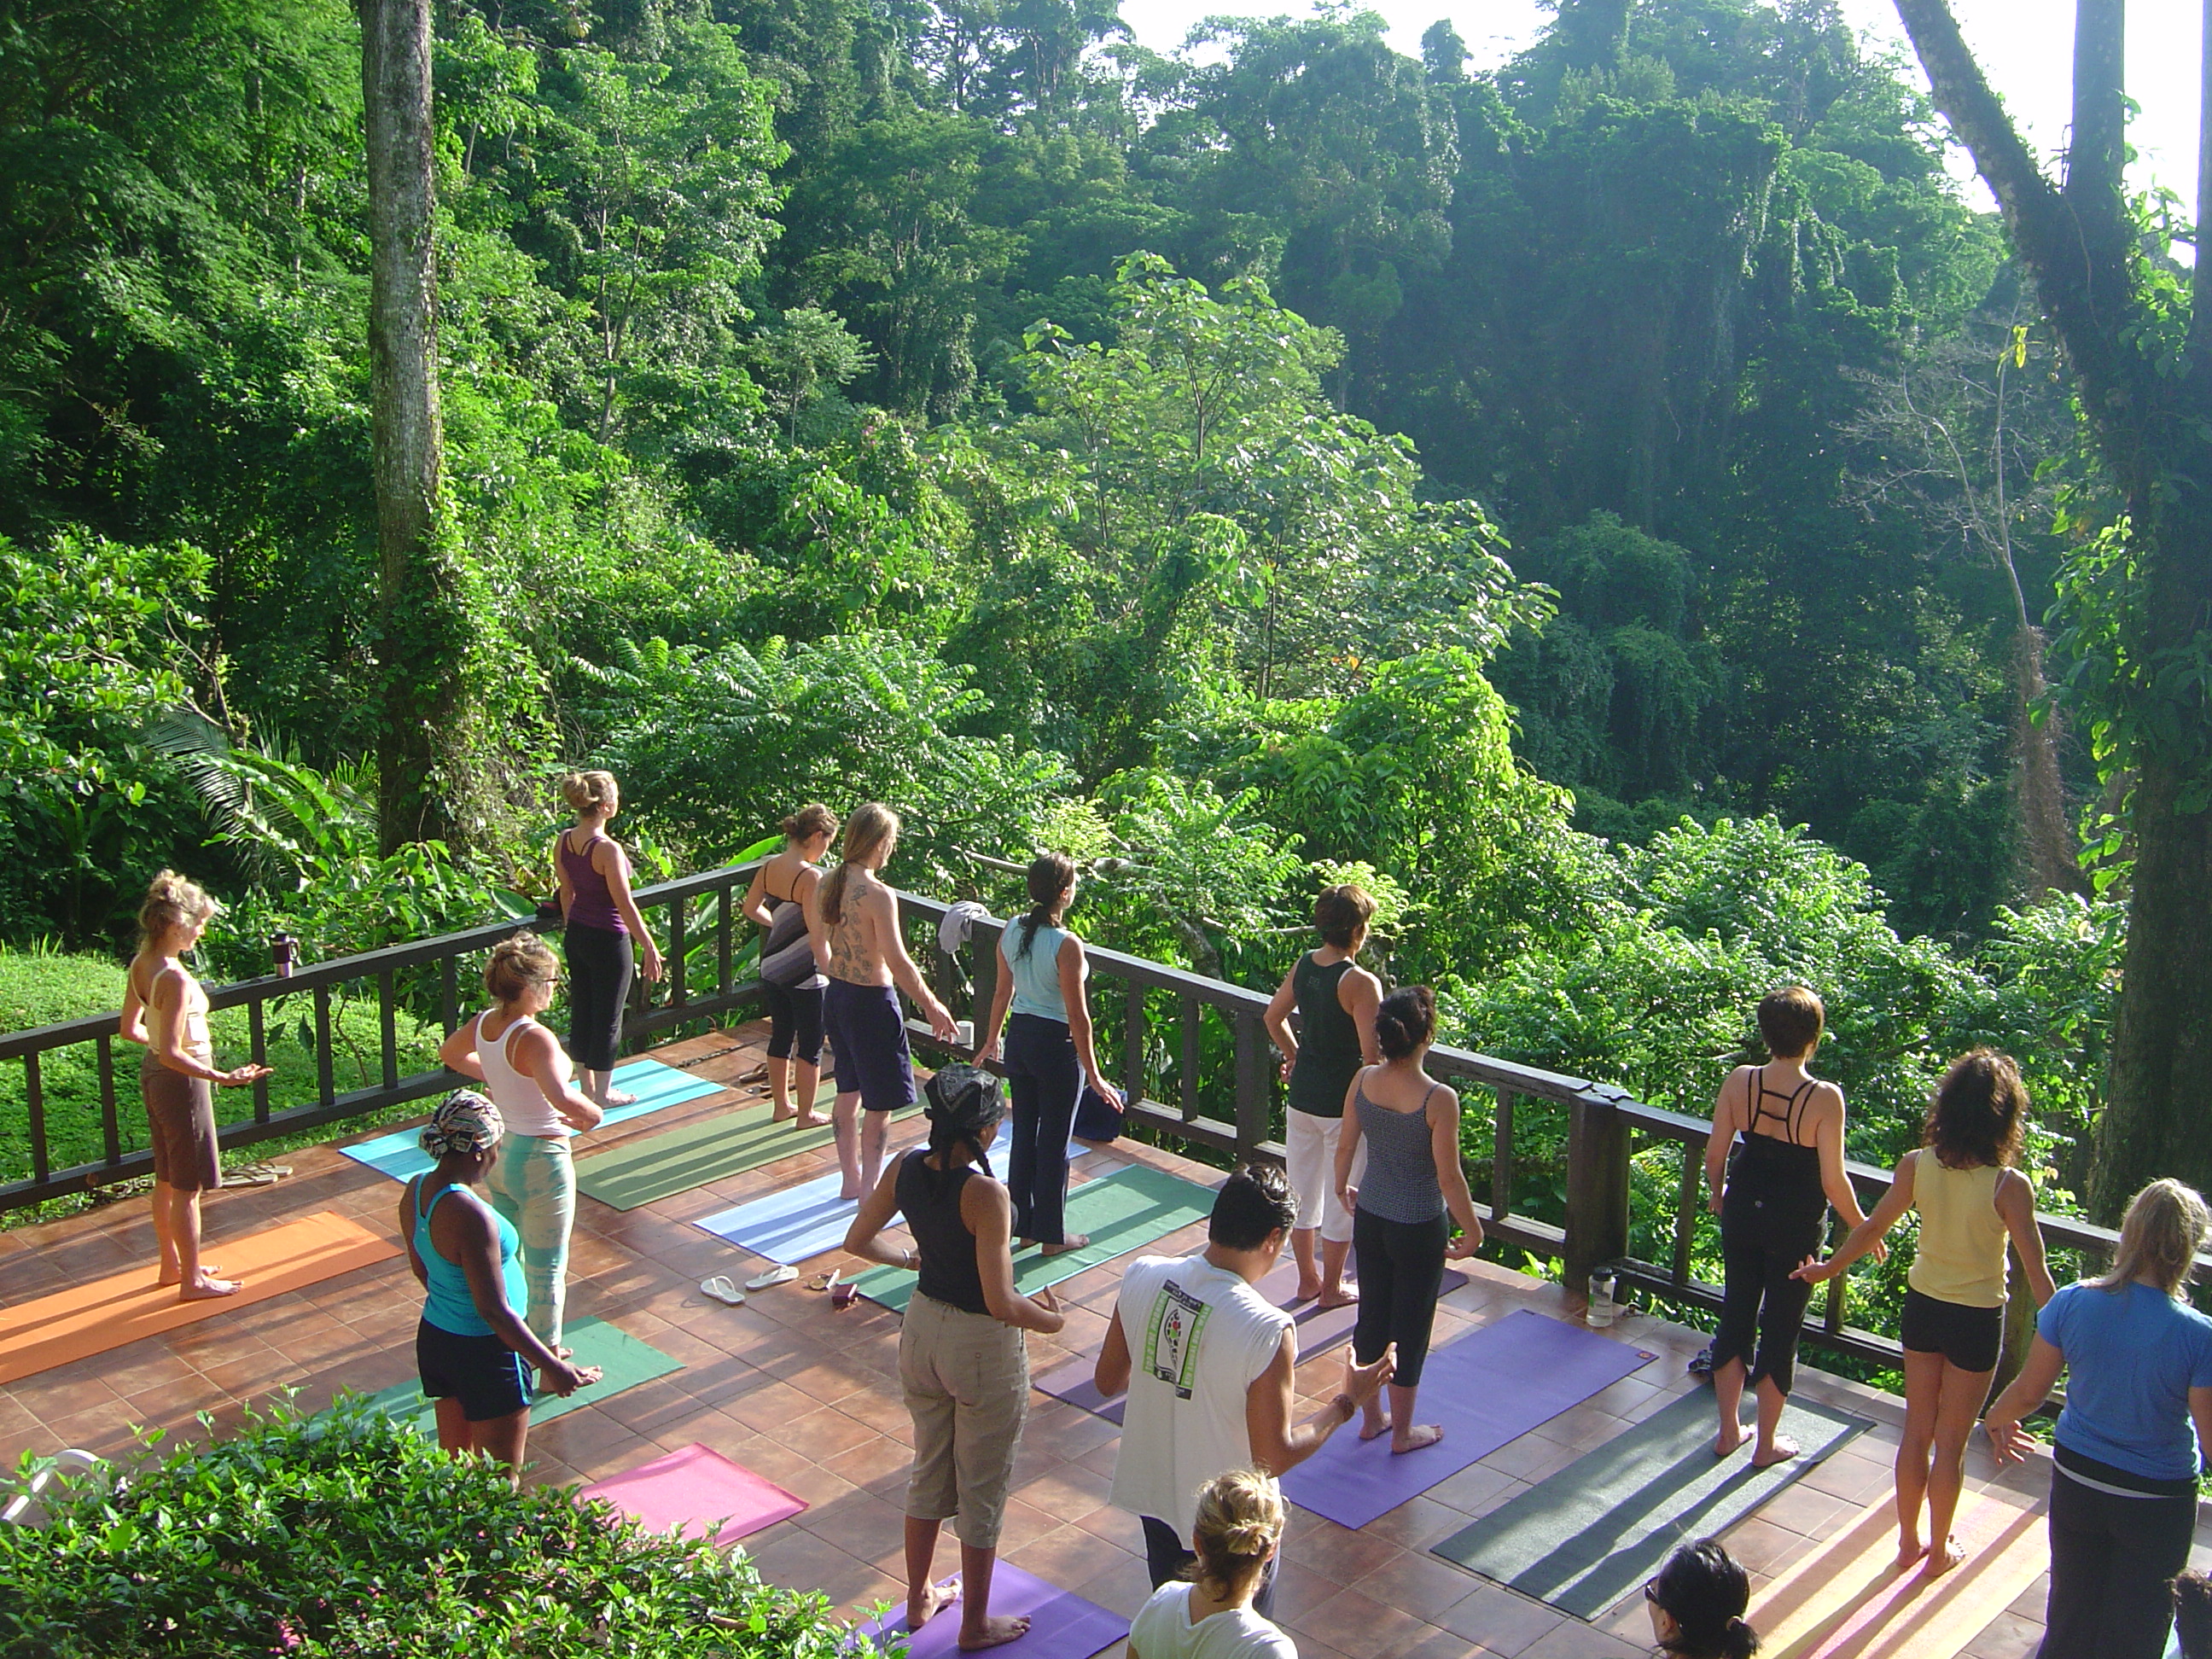 Particpants are prcticing yoga on a roof surrounded by a tropical forest samasati nature retreat